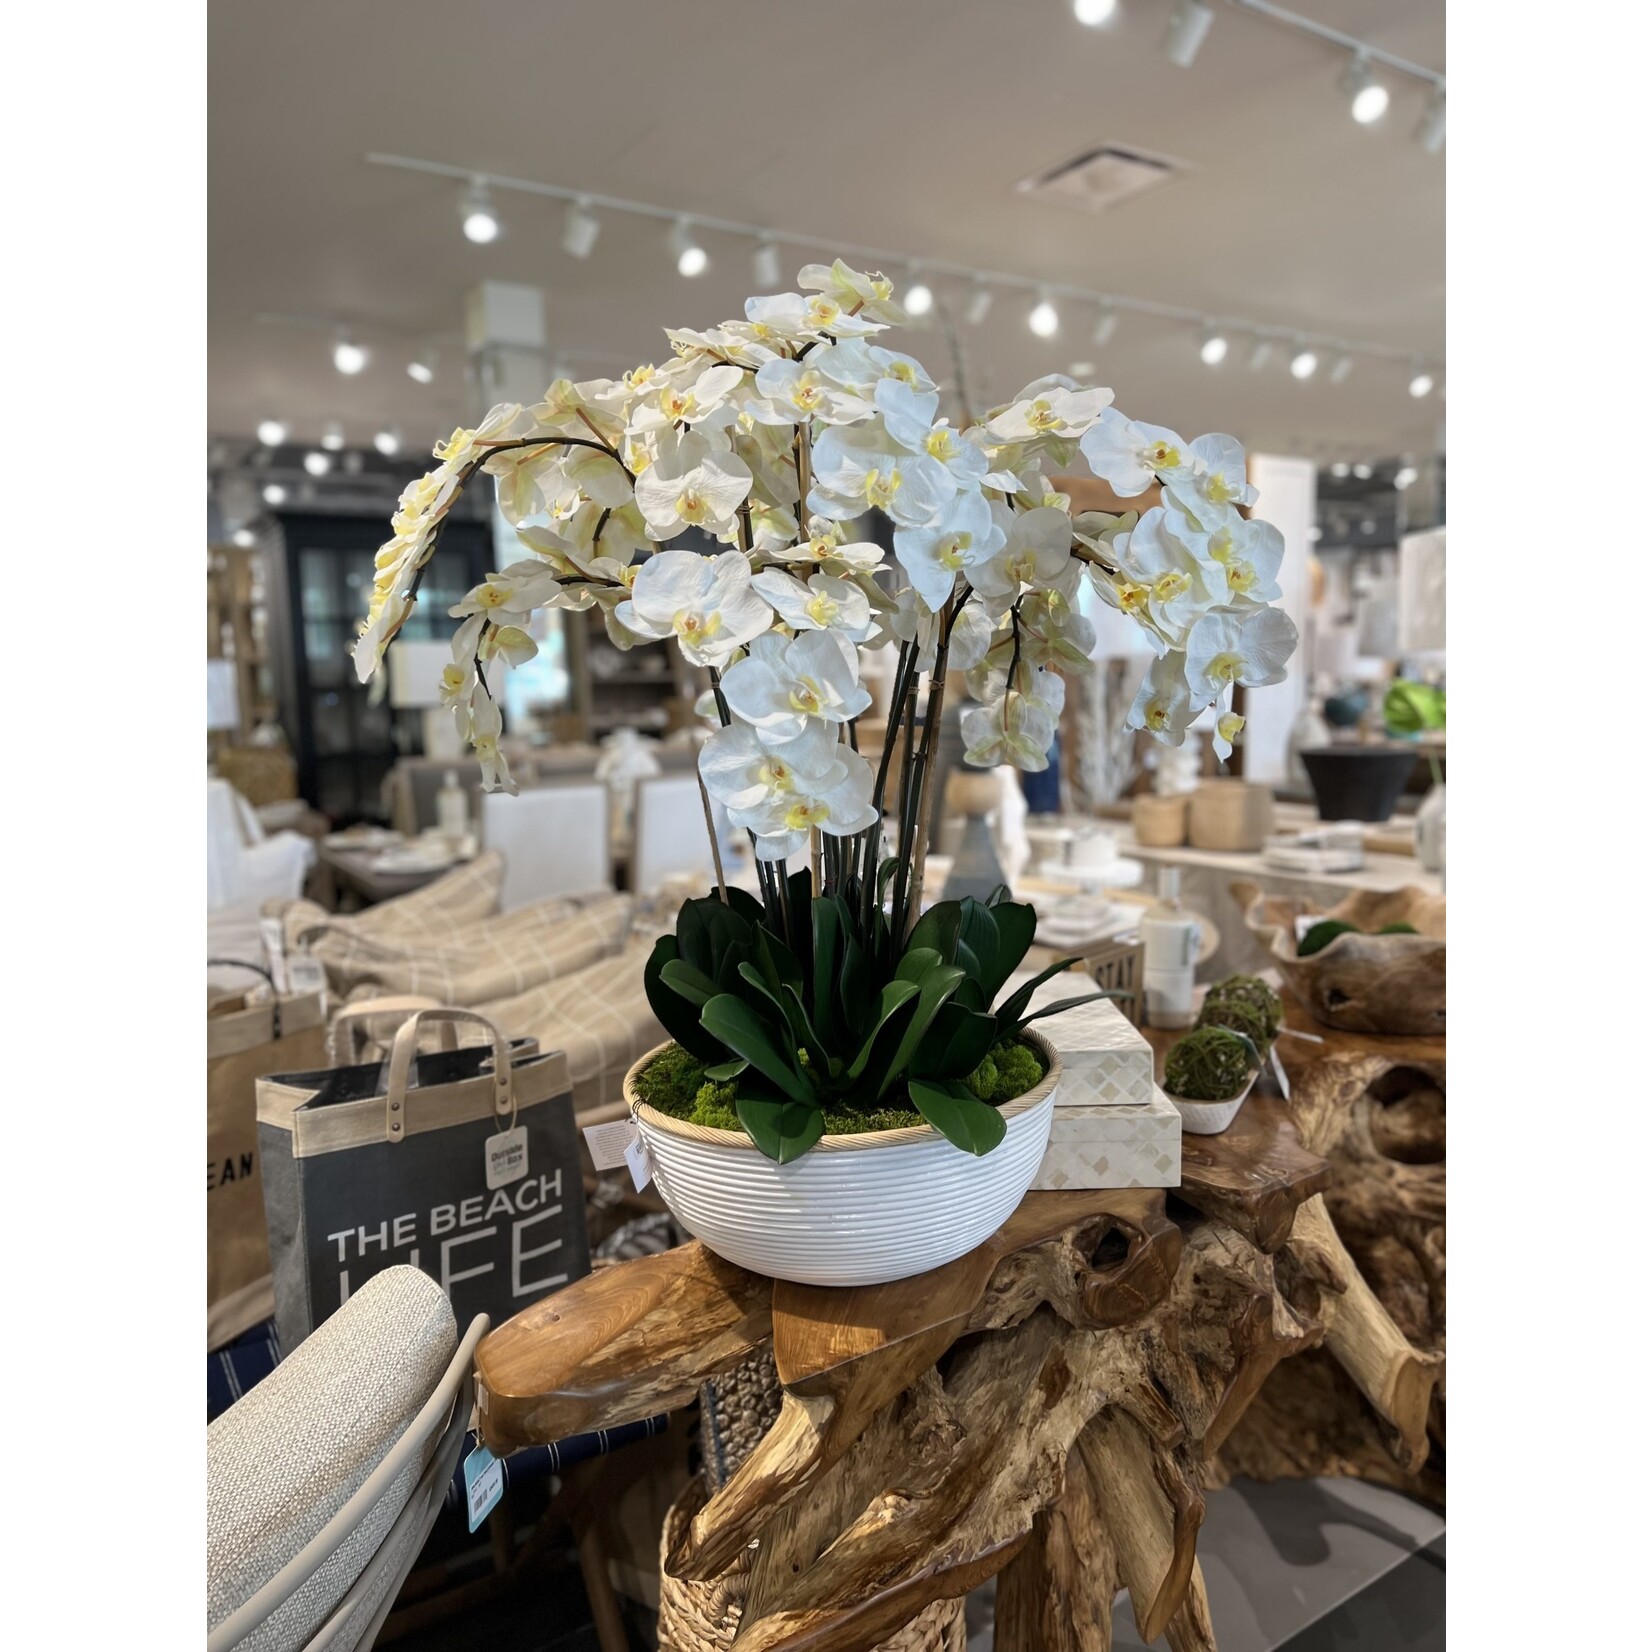 Outside The Box 36" White Phalaenopsis Orchid In White Rattan Bowl